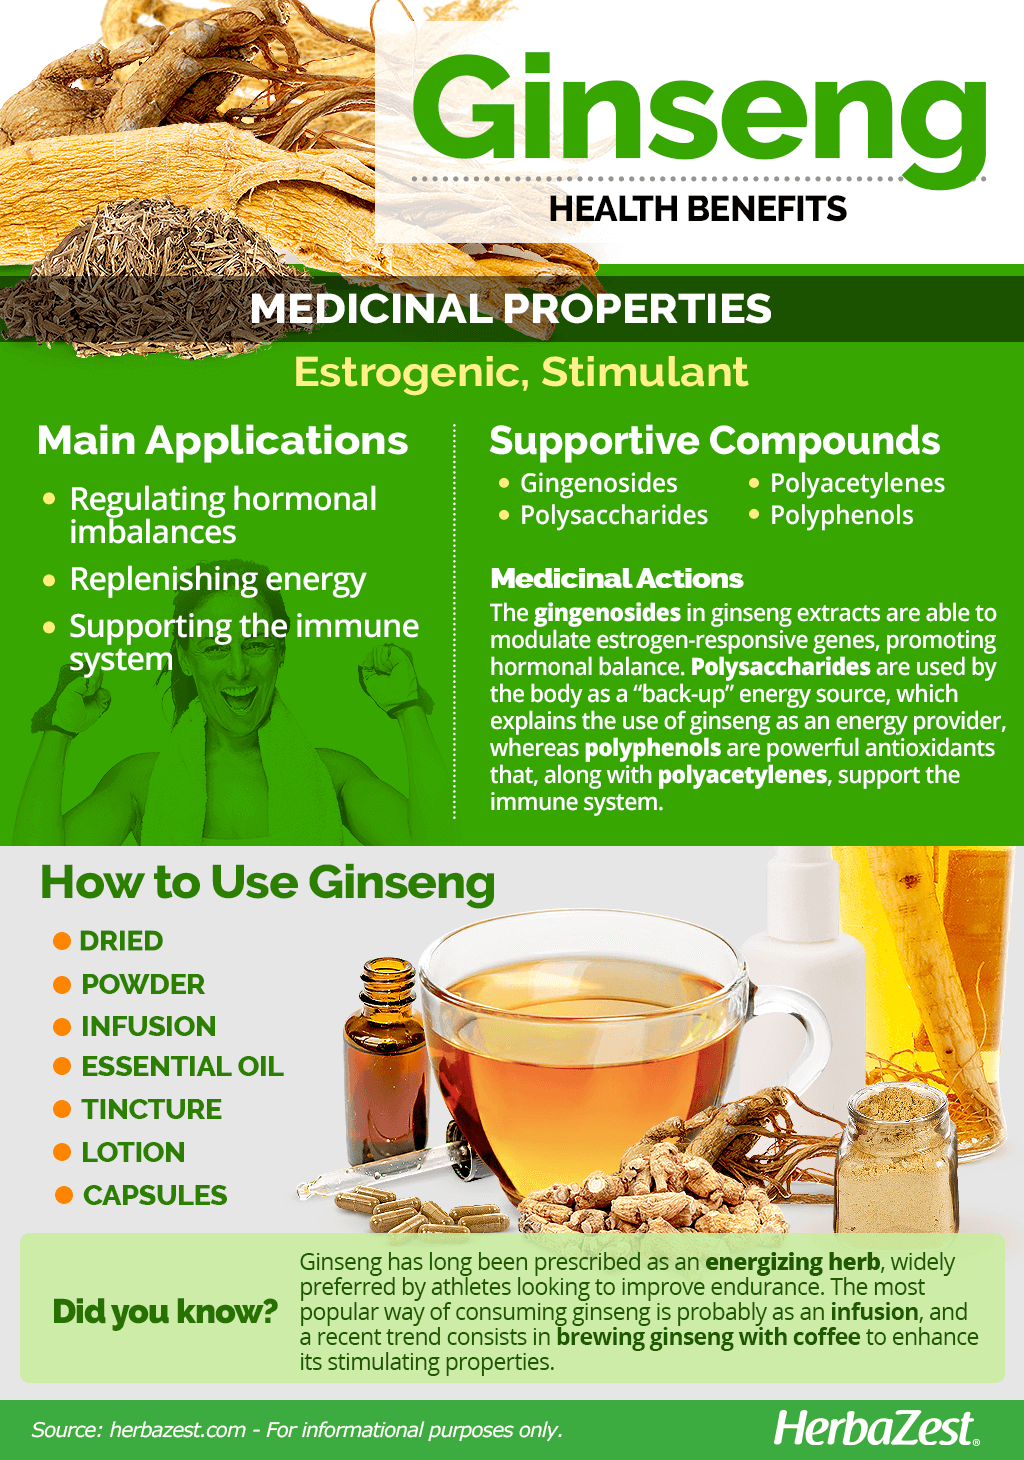 All About Ginseng